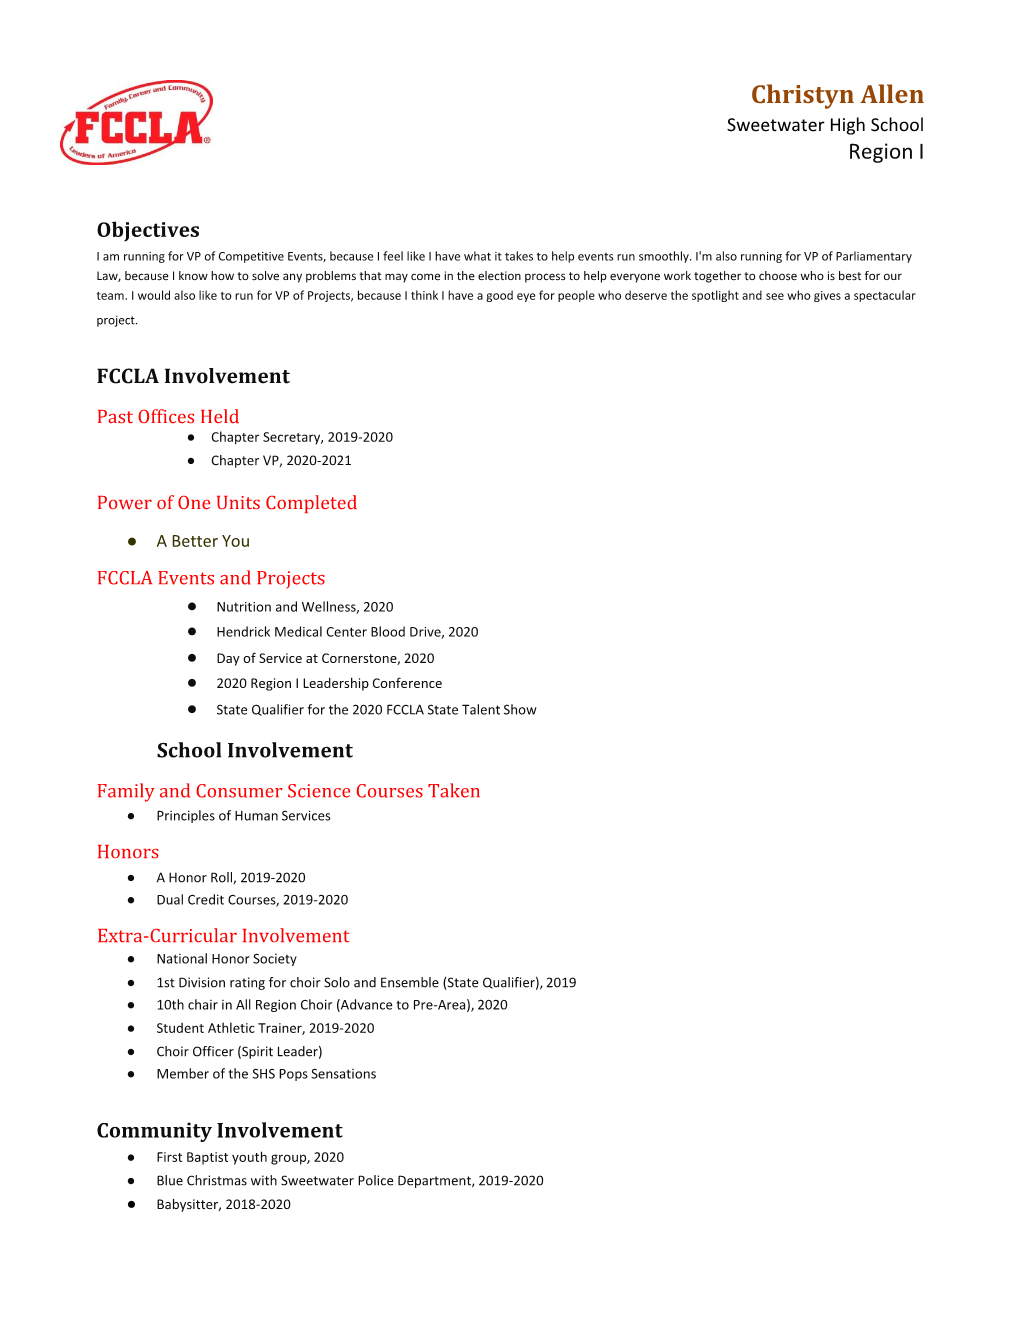 Candidate Resumes